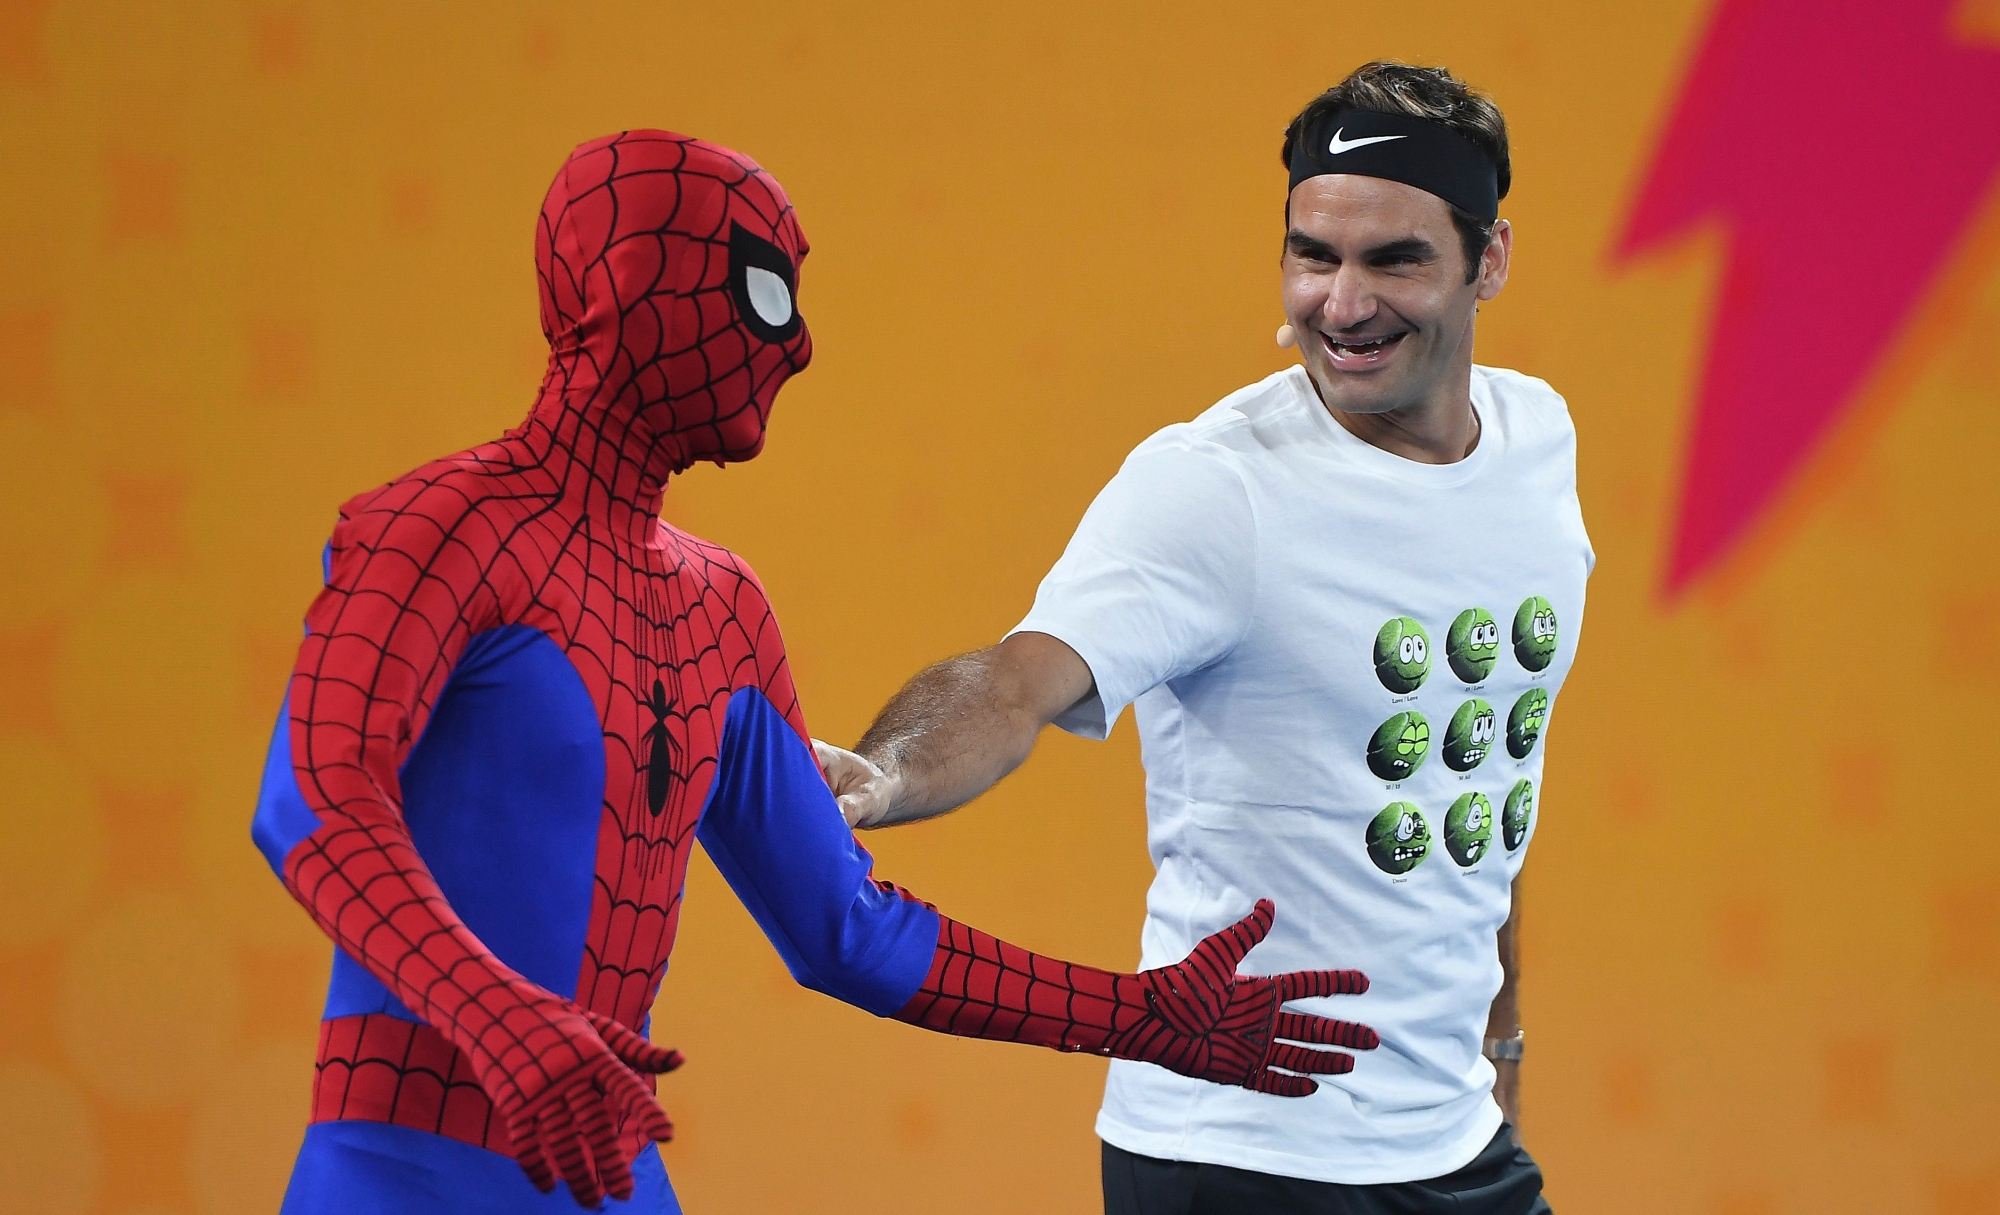 epa06434586 Roger Federer of Switzerland (R) is seen alongside a person dressed as Spiderman as he participates in the Rod Laver Arena Spectacular during the Kids Tennis Day at Melbourne Park in Melbourne, Victoria, Australia, 13 January 2018.  EPA/JULIAN SMITH  AUSTRALIA AND NEW ZEALAND OUT AUSTRALIA TENNIS AUSTRALIAN OPEN GRAND SLAM